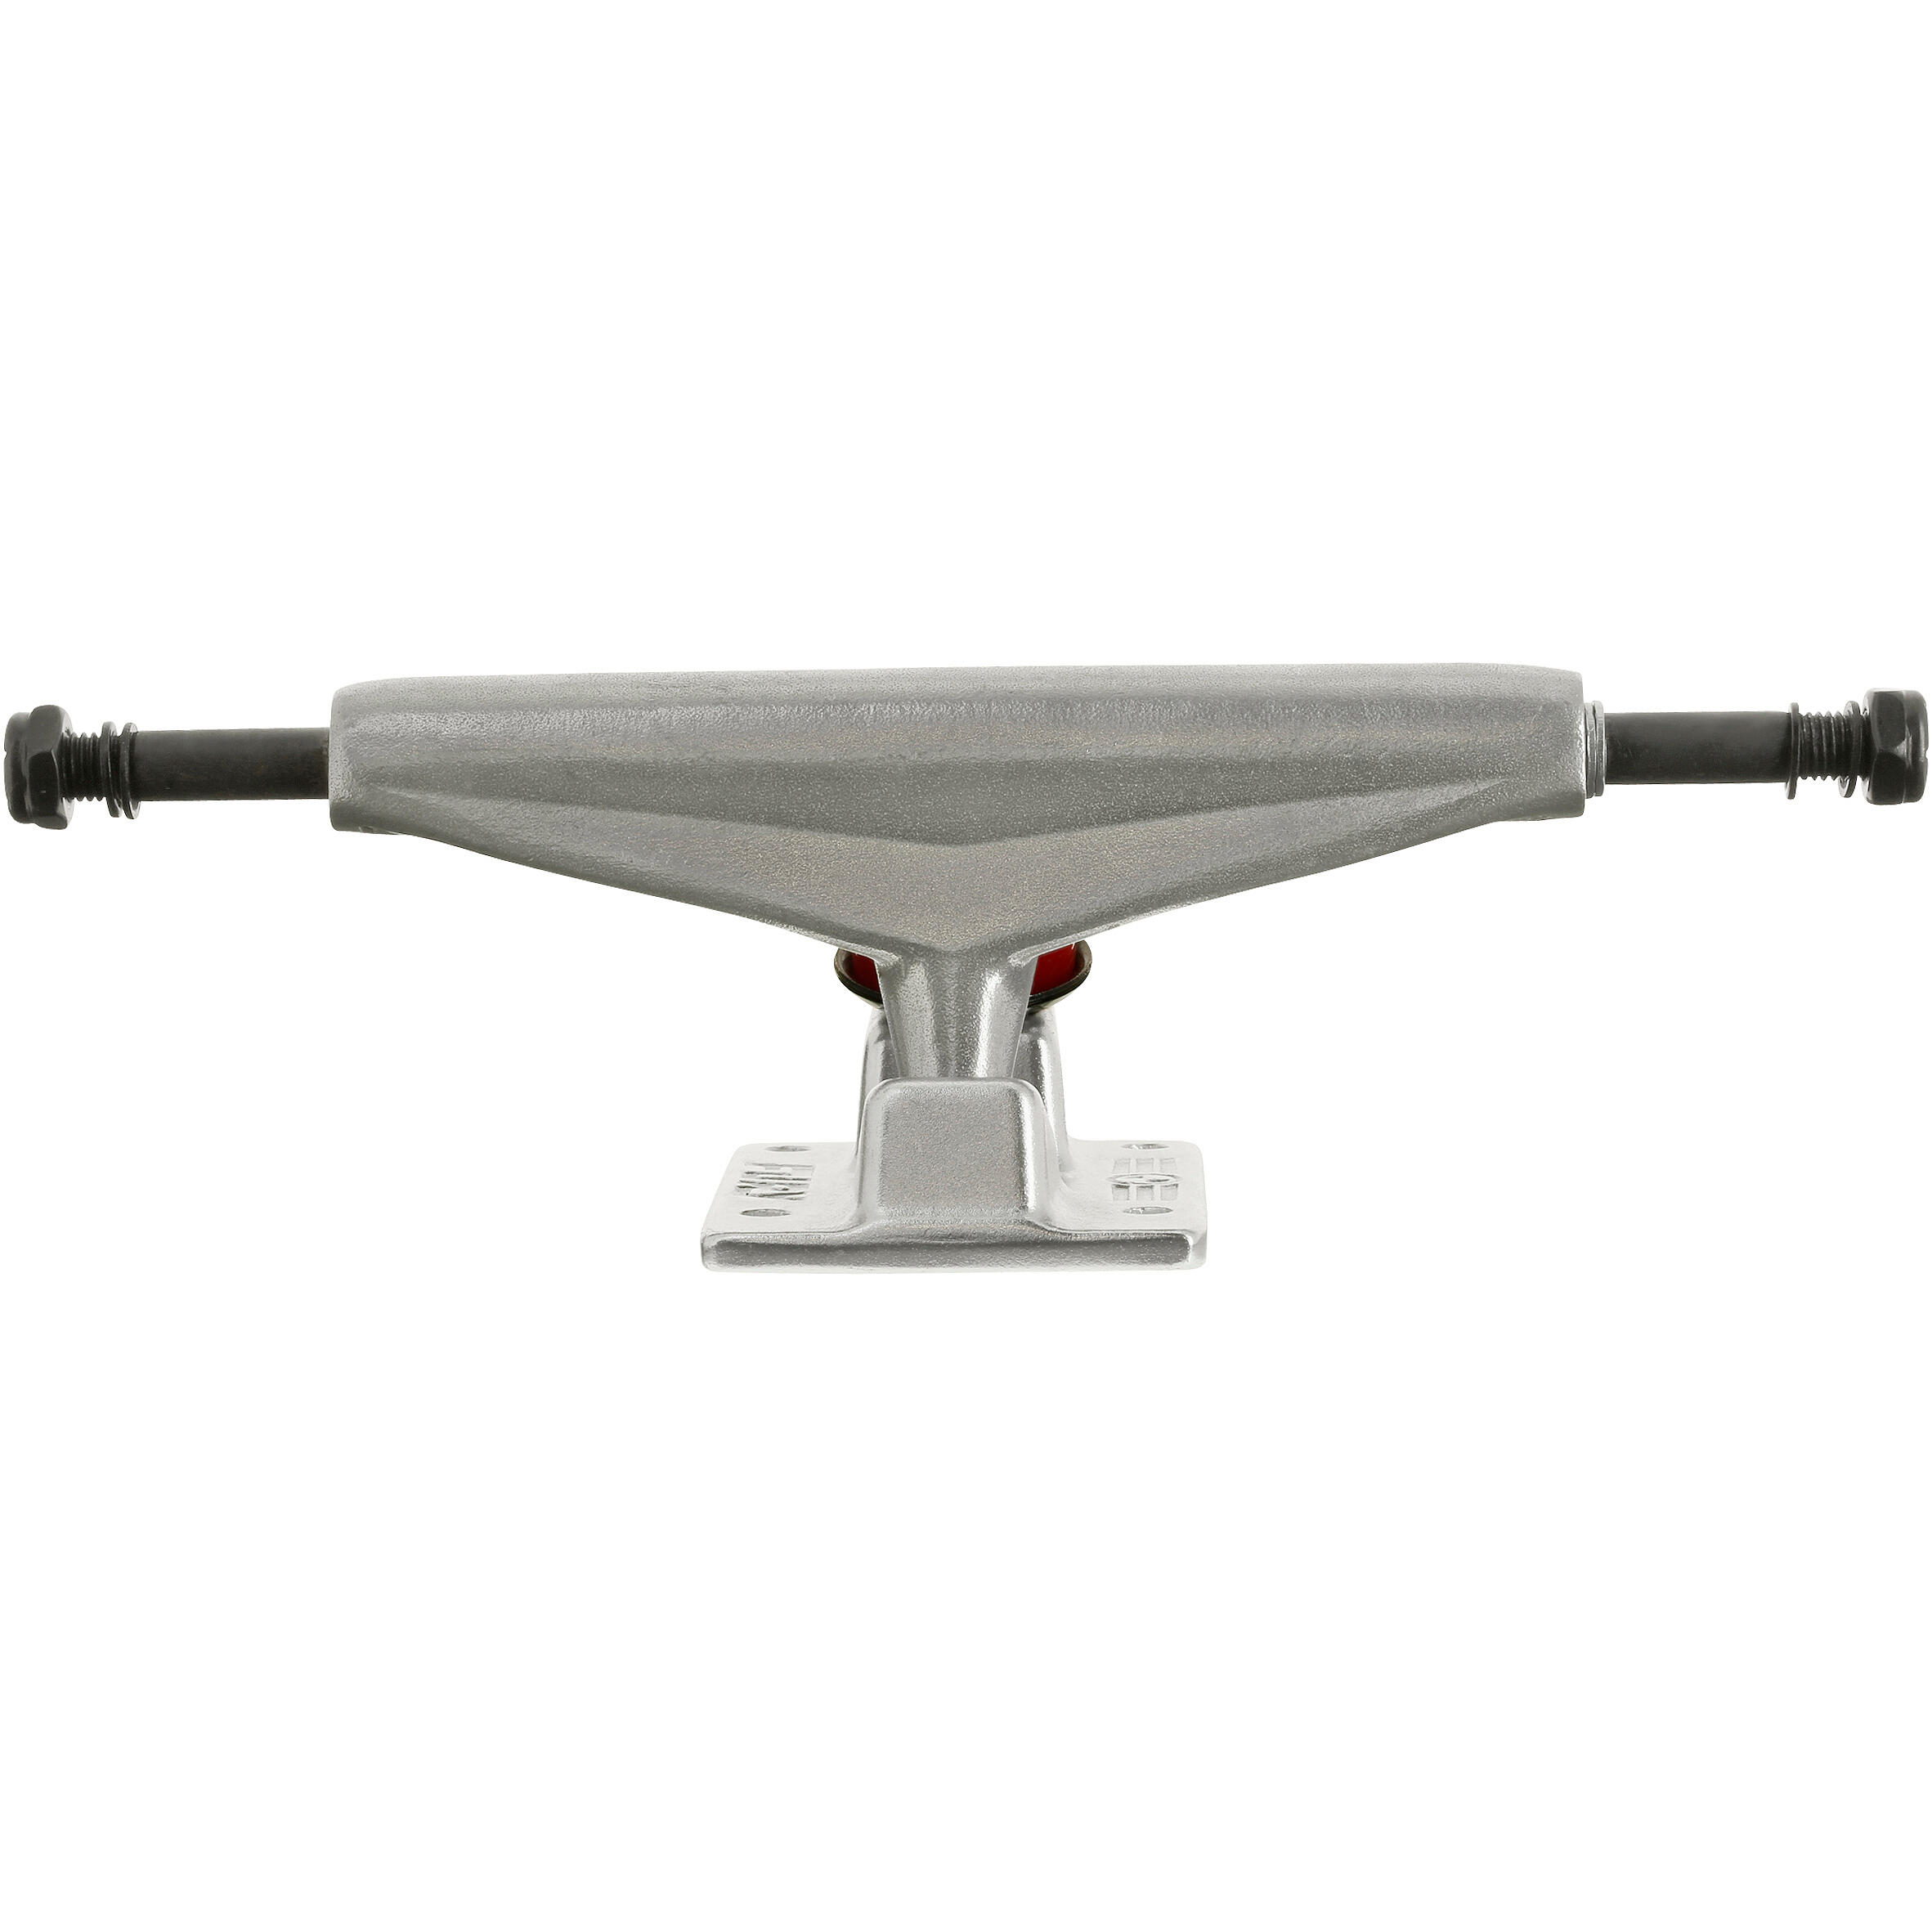 OXELO Fury Skateboard Forged Baseplate Truck Size 8.25" (20.96 mm)